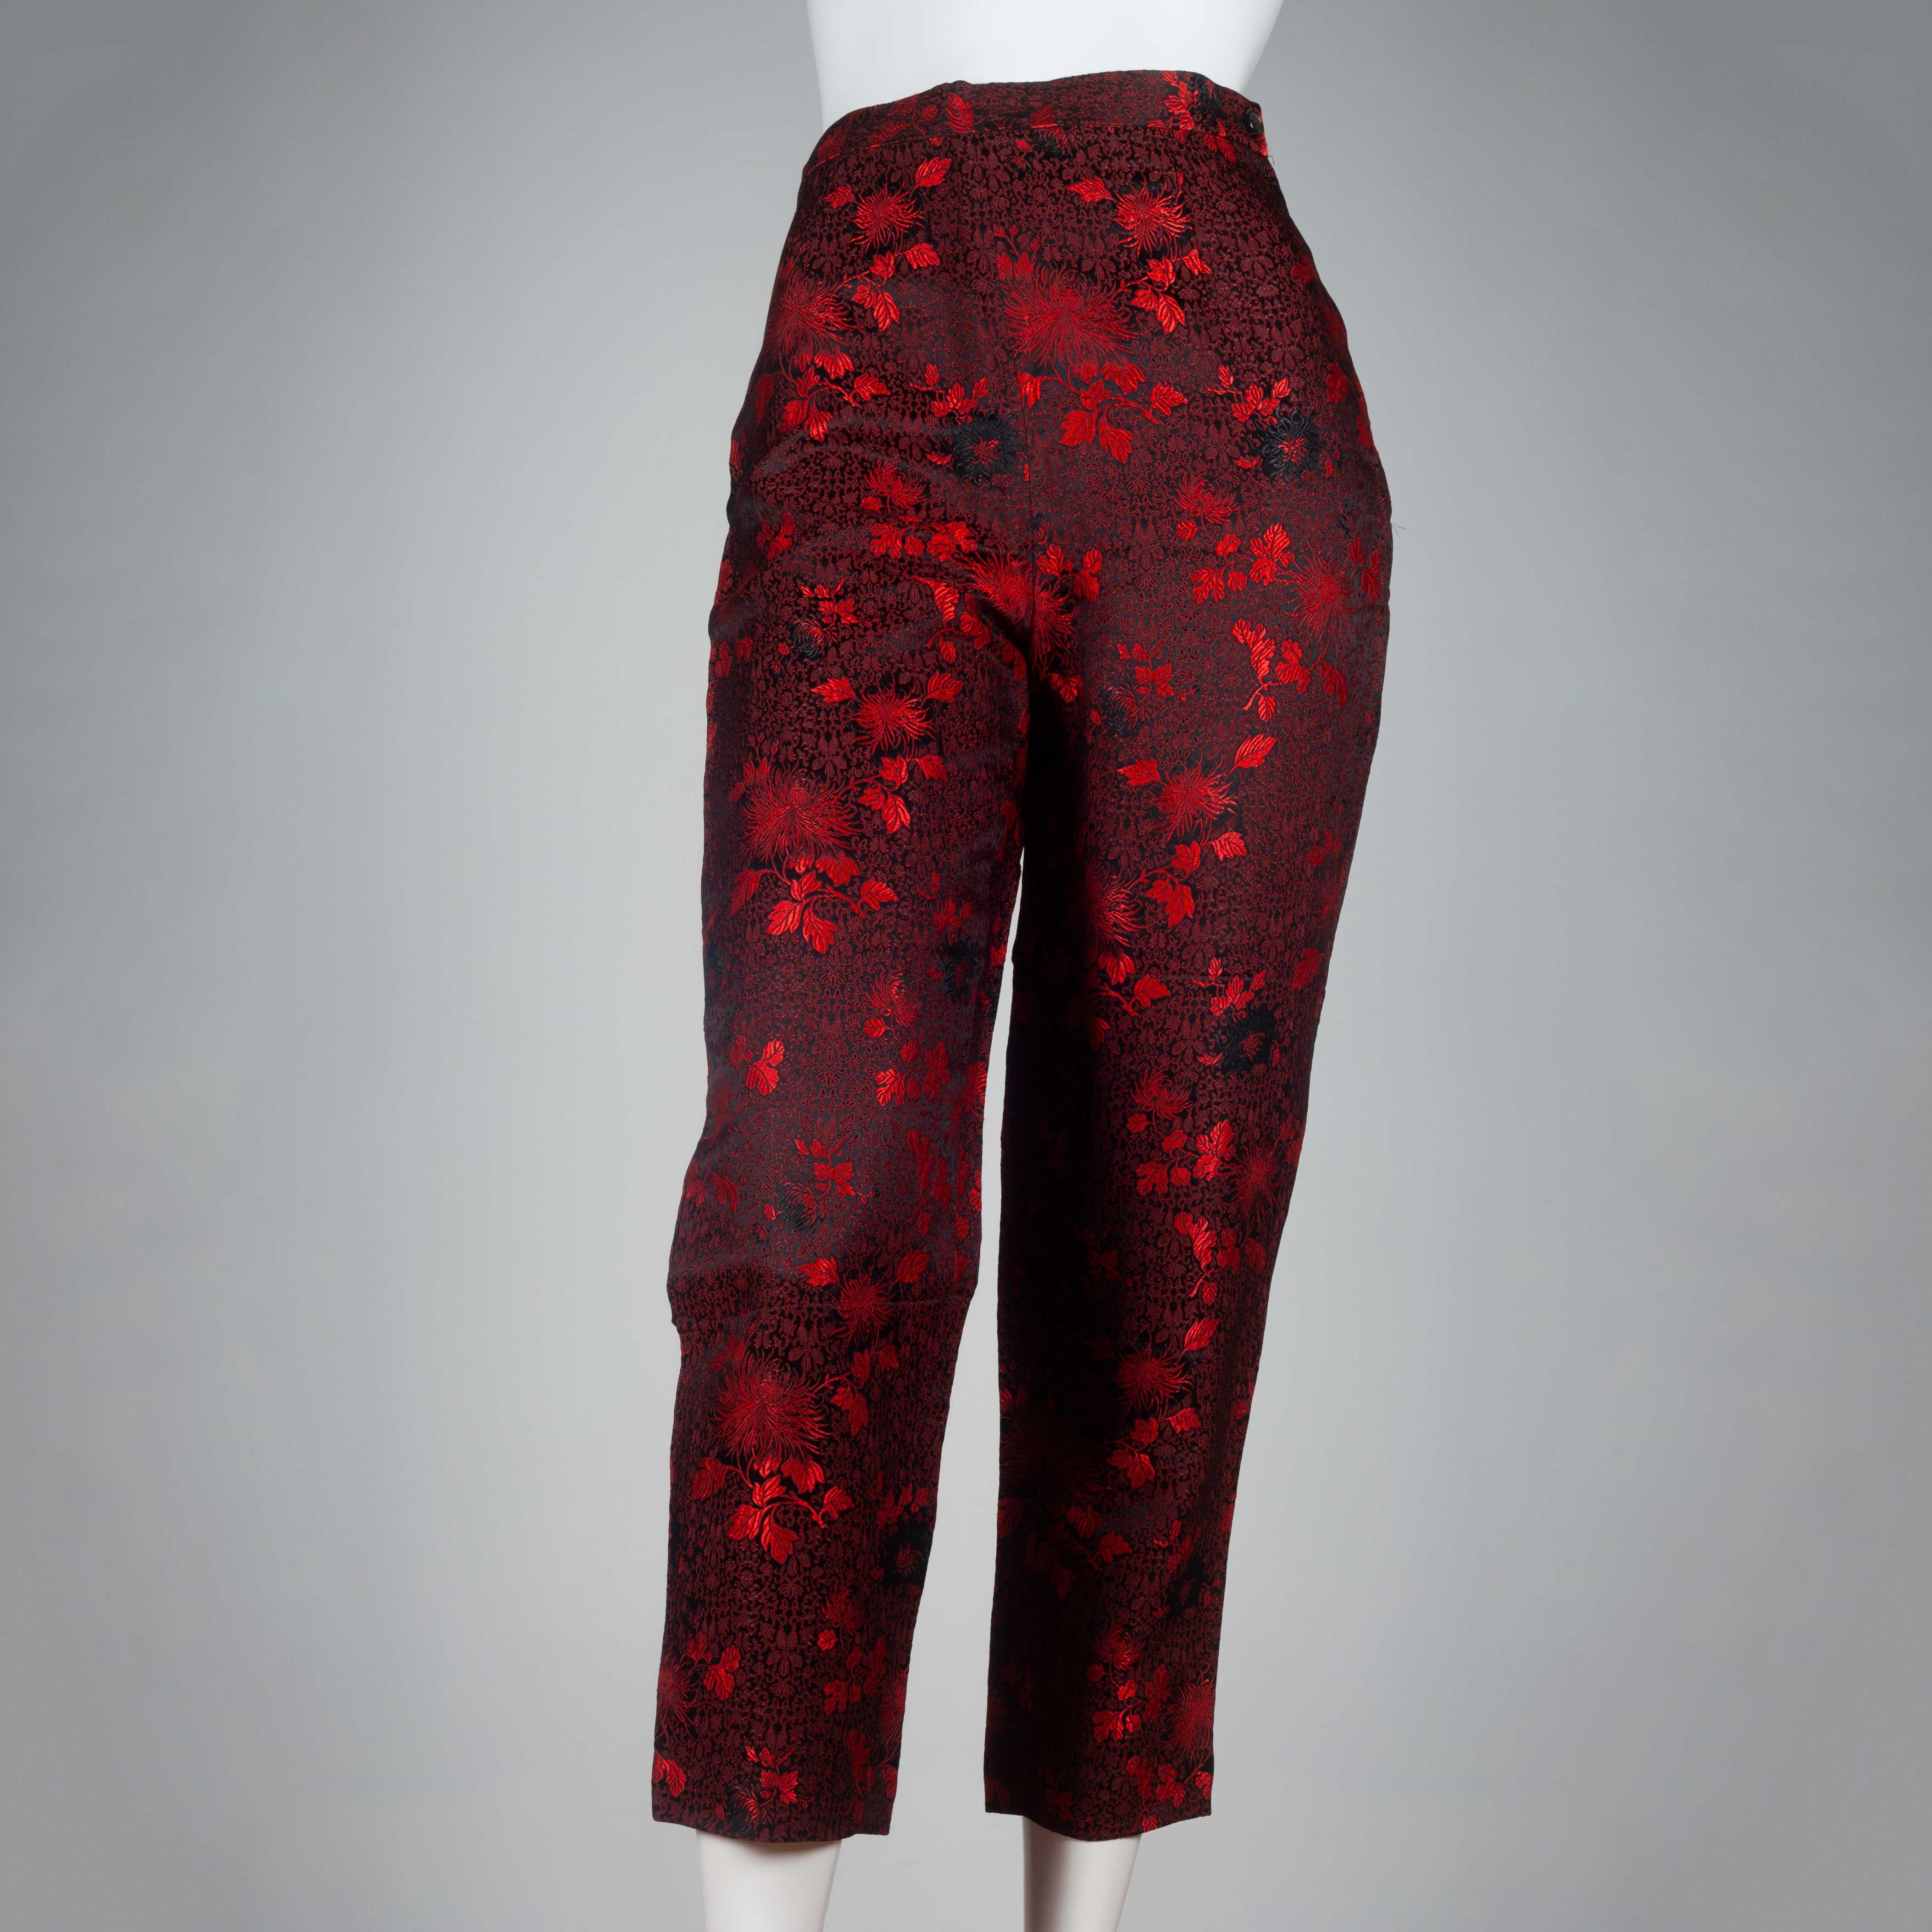 Comme des Garçons 1991 black trousers with bright red all-over flower and leaf embroidery. A rare vintage piece sourced directly from Japan and exhibiting some of the trademarks of the Comme des Garçons brand, notably the use of material and color